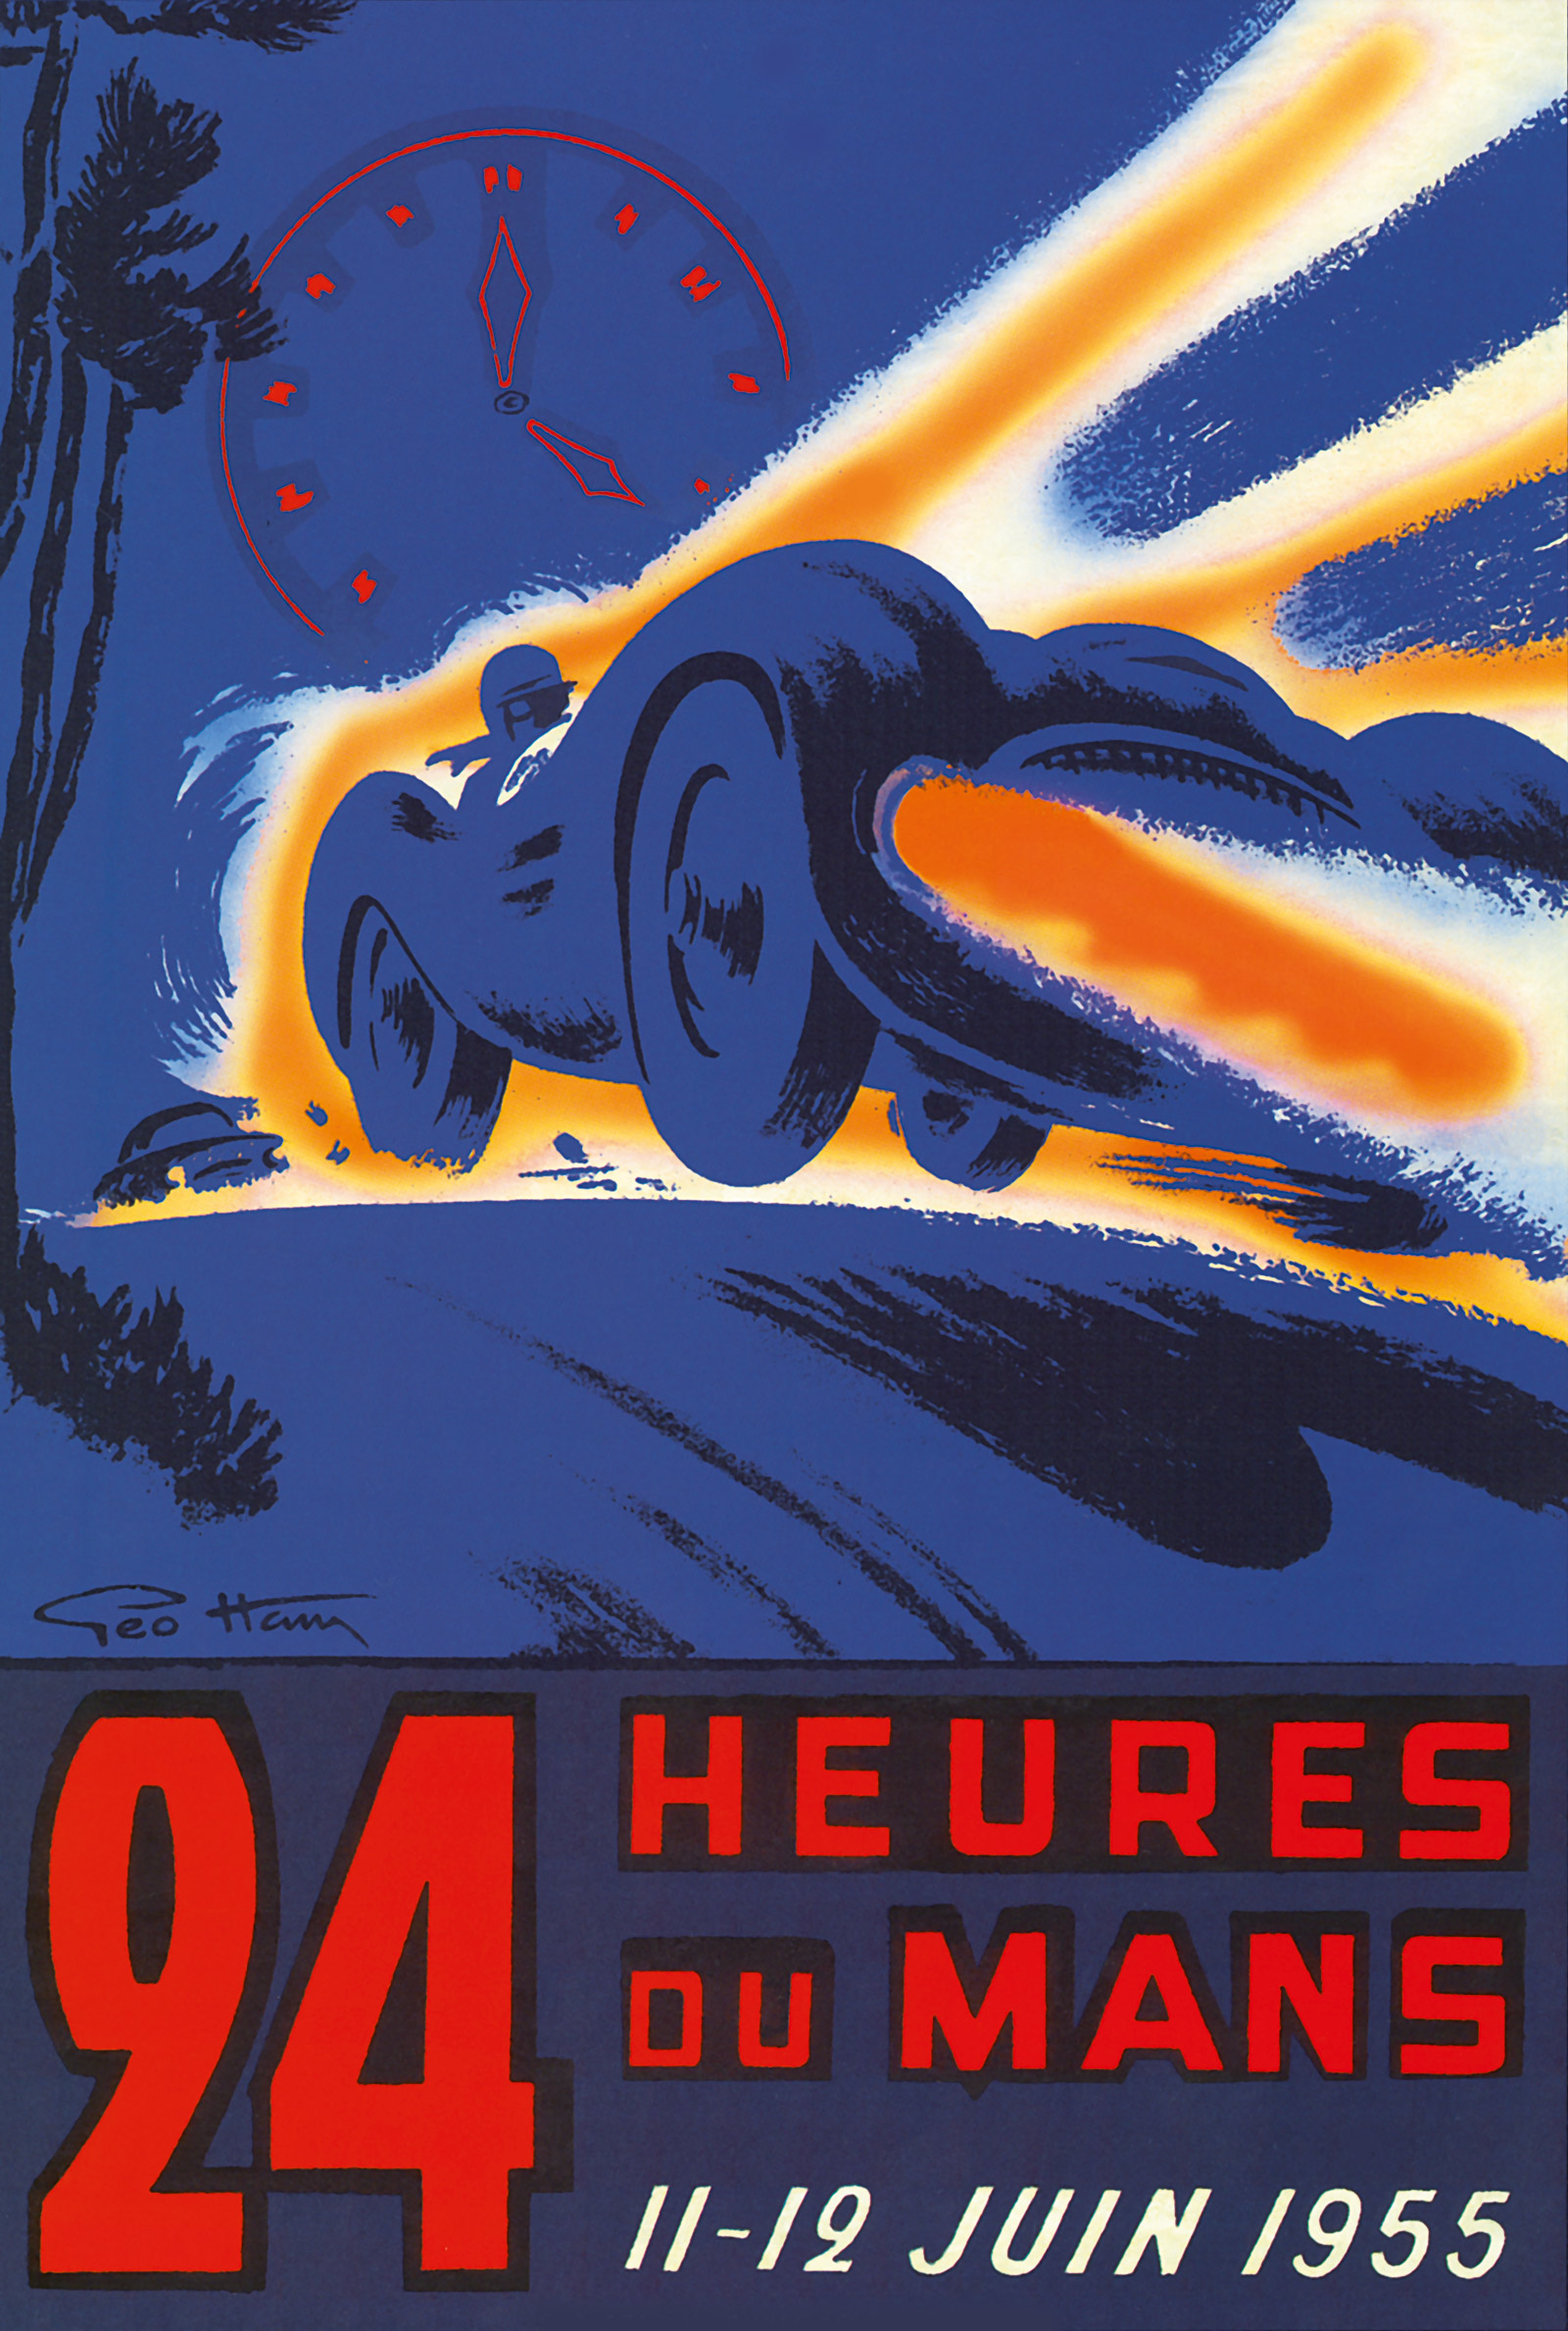 A promotional poster for the 24 Hours of Le Mans, nineteen fifty-five. Held annually since 1923 in and around the town of Le Mans, France, the race is the world’s longest-running automobile endurance event.